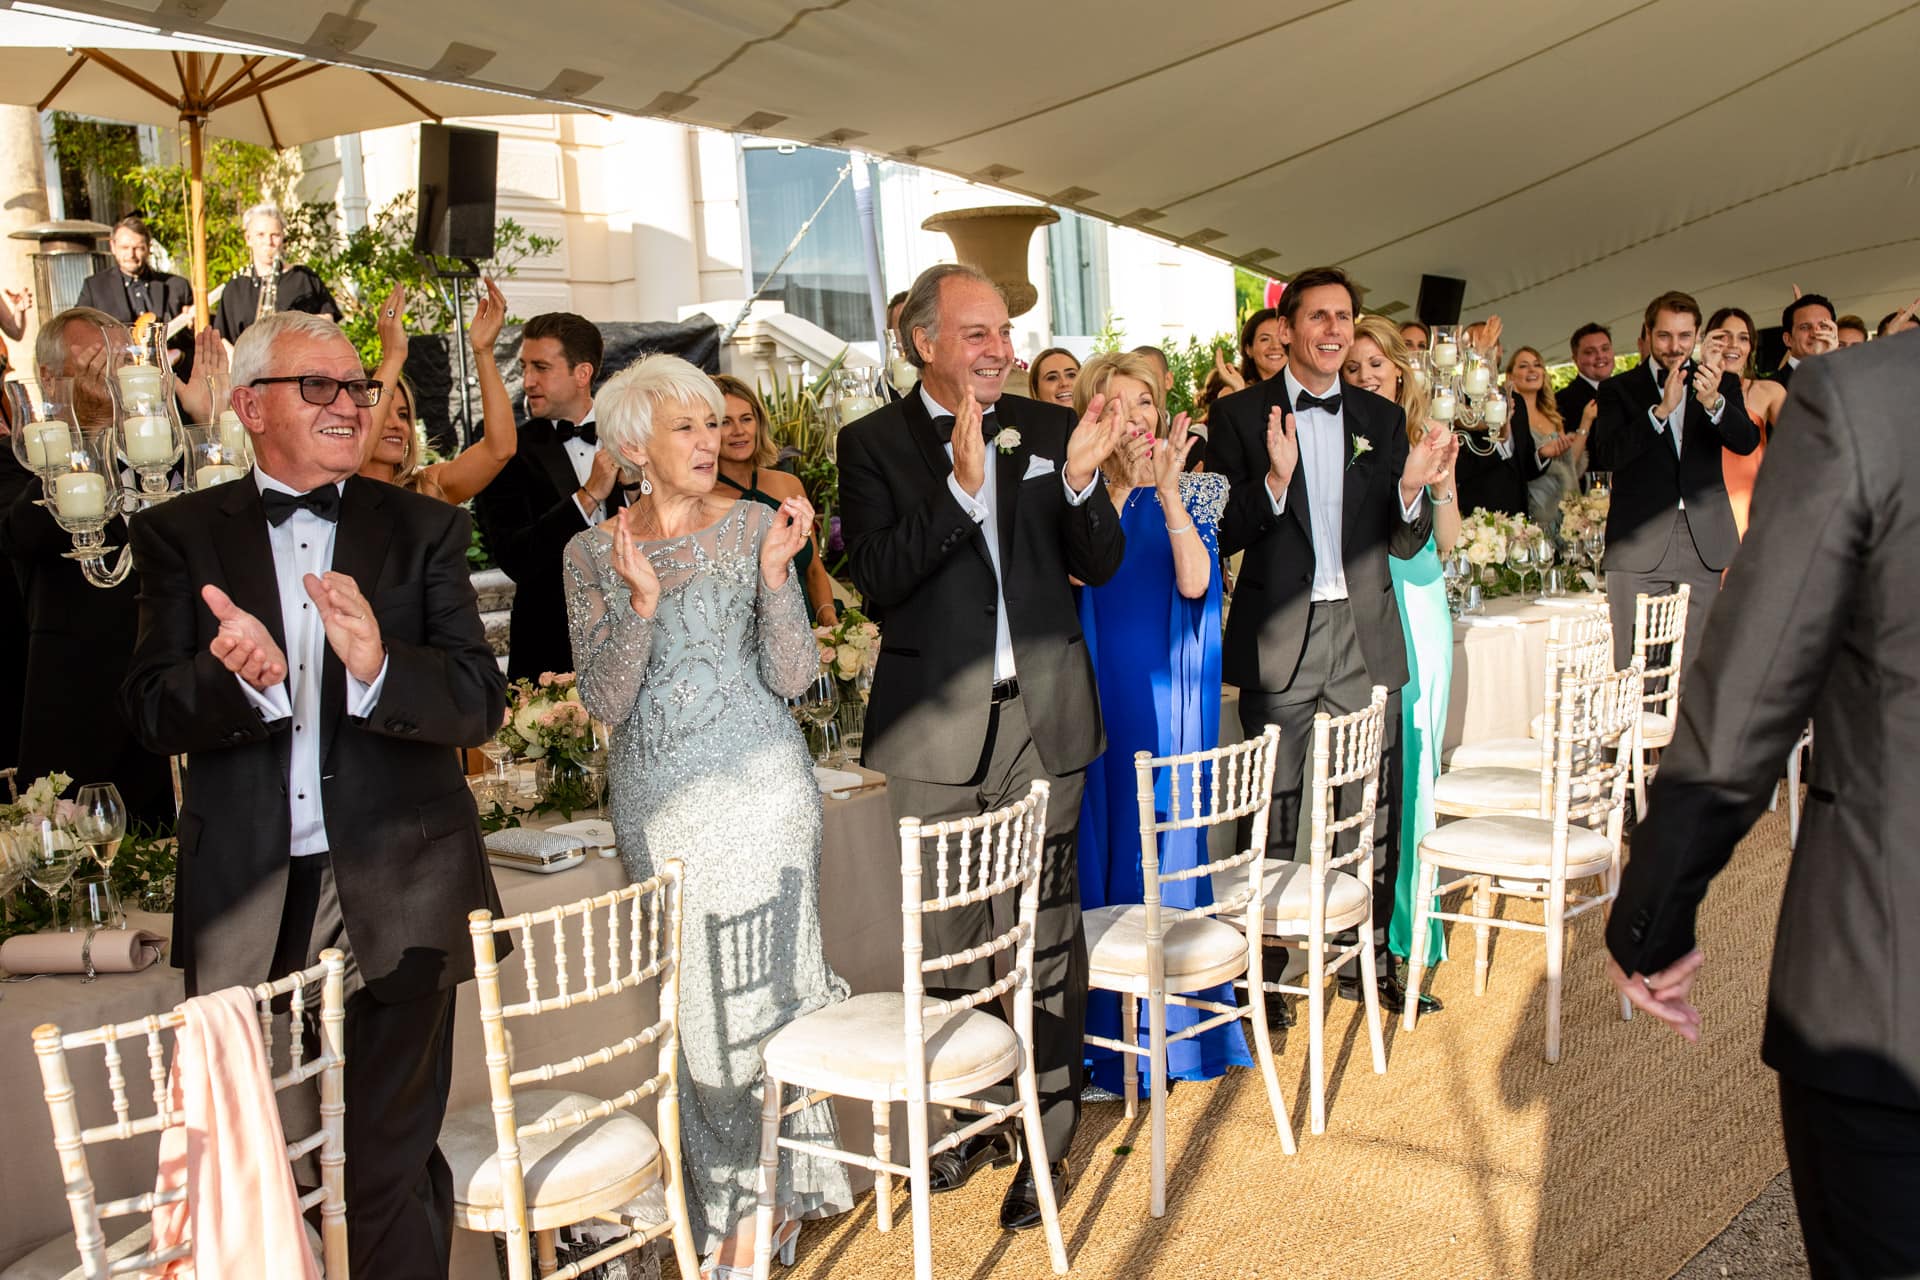 Clapping in the new mr & mrs